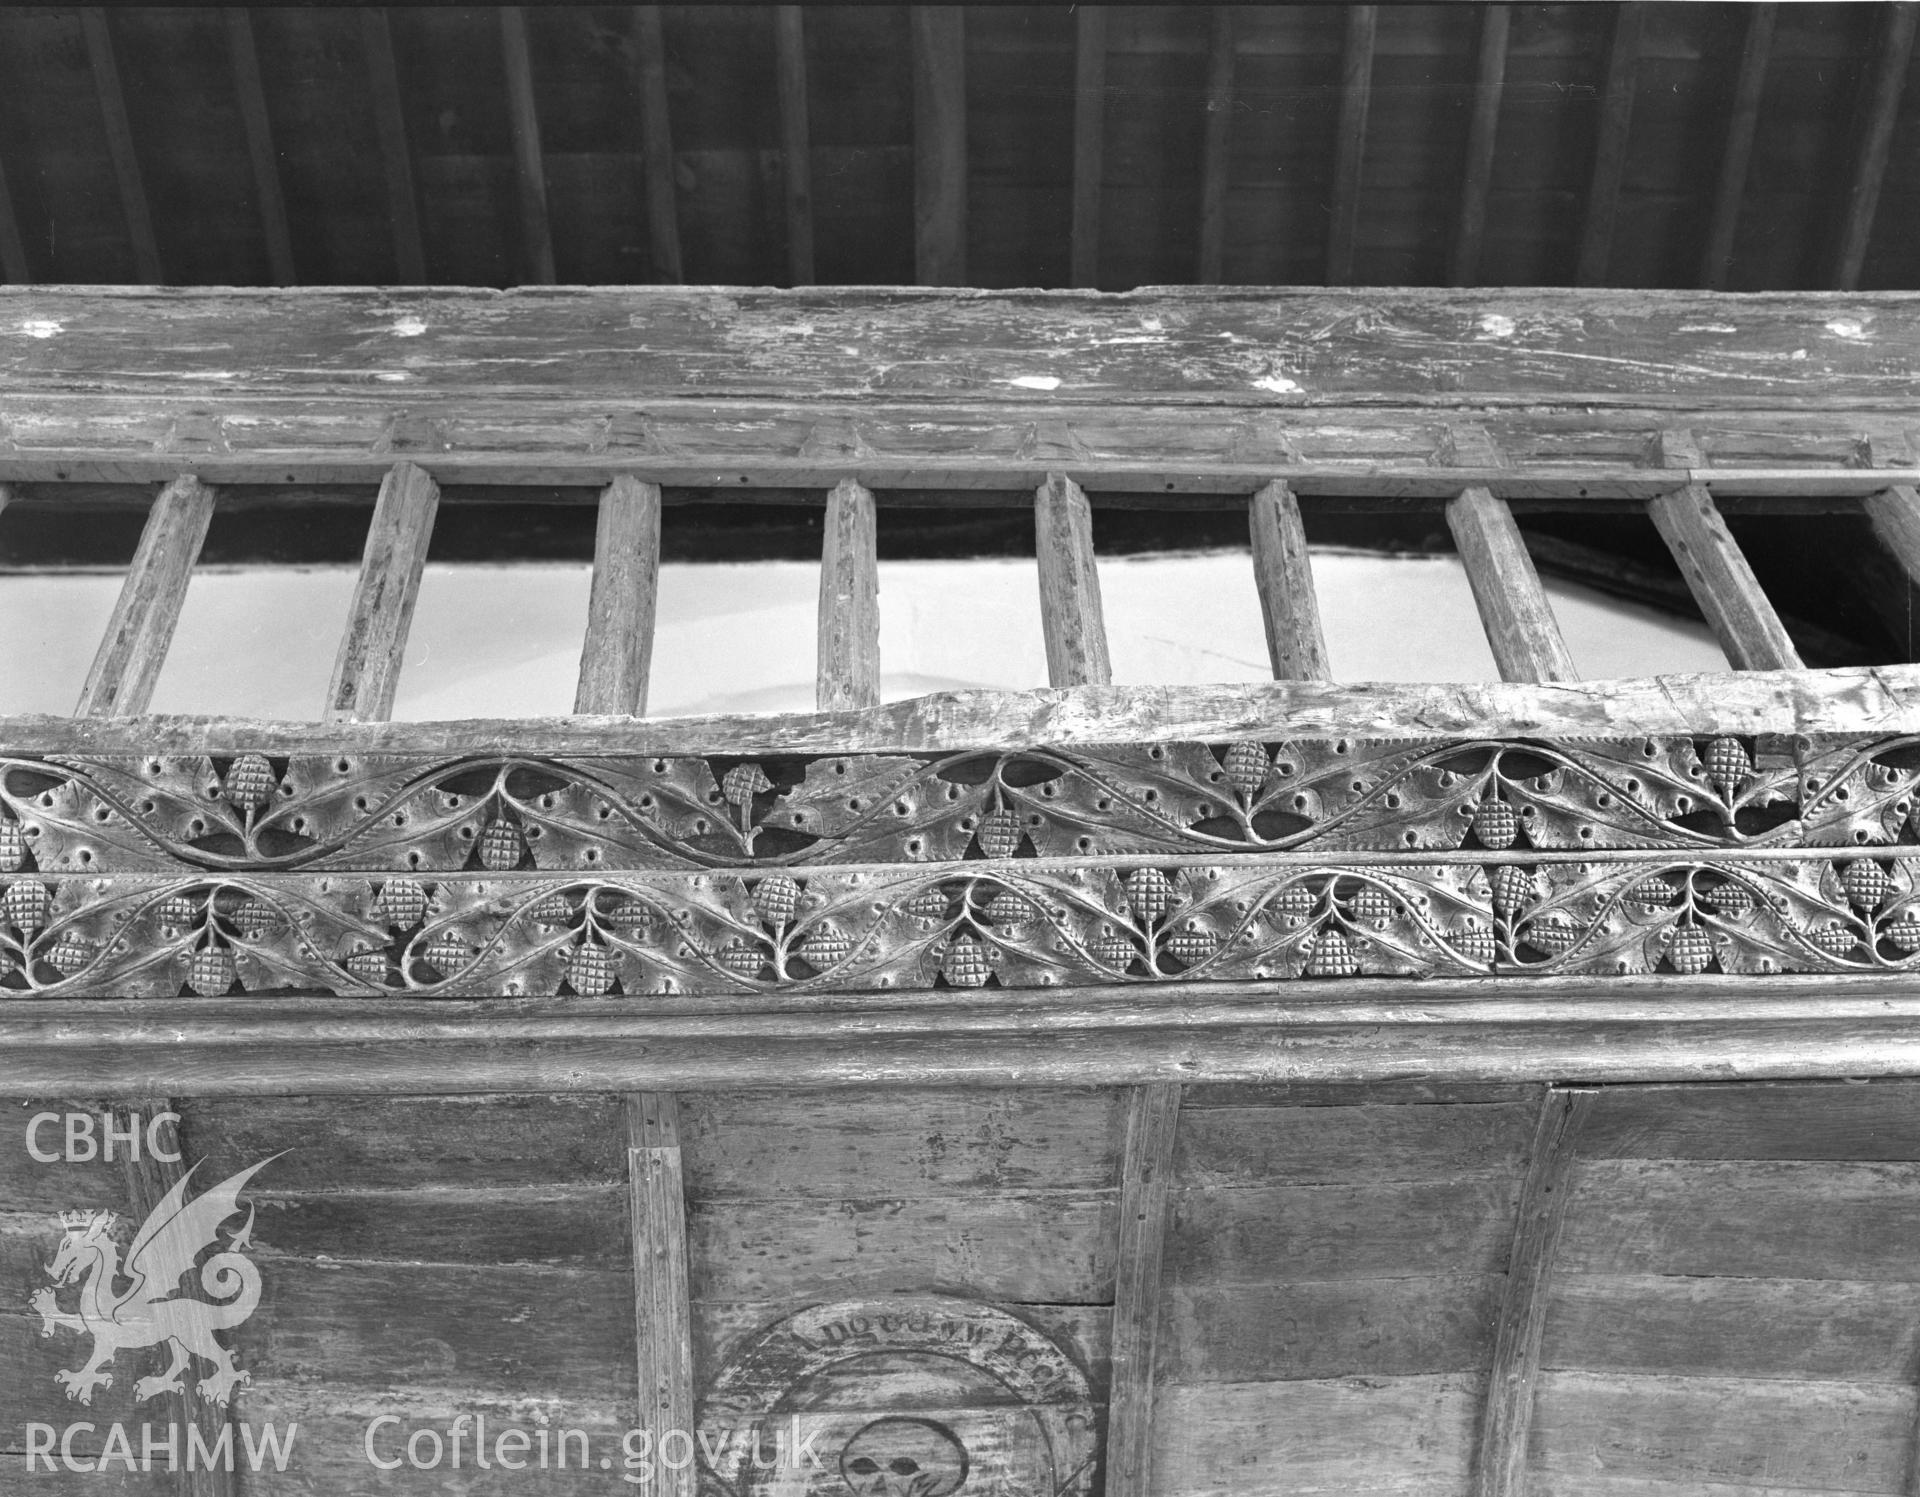 Black and white acetate negative showing interior view of Llaneilian Church.